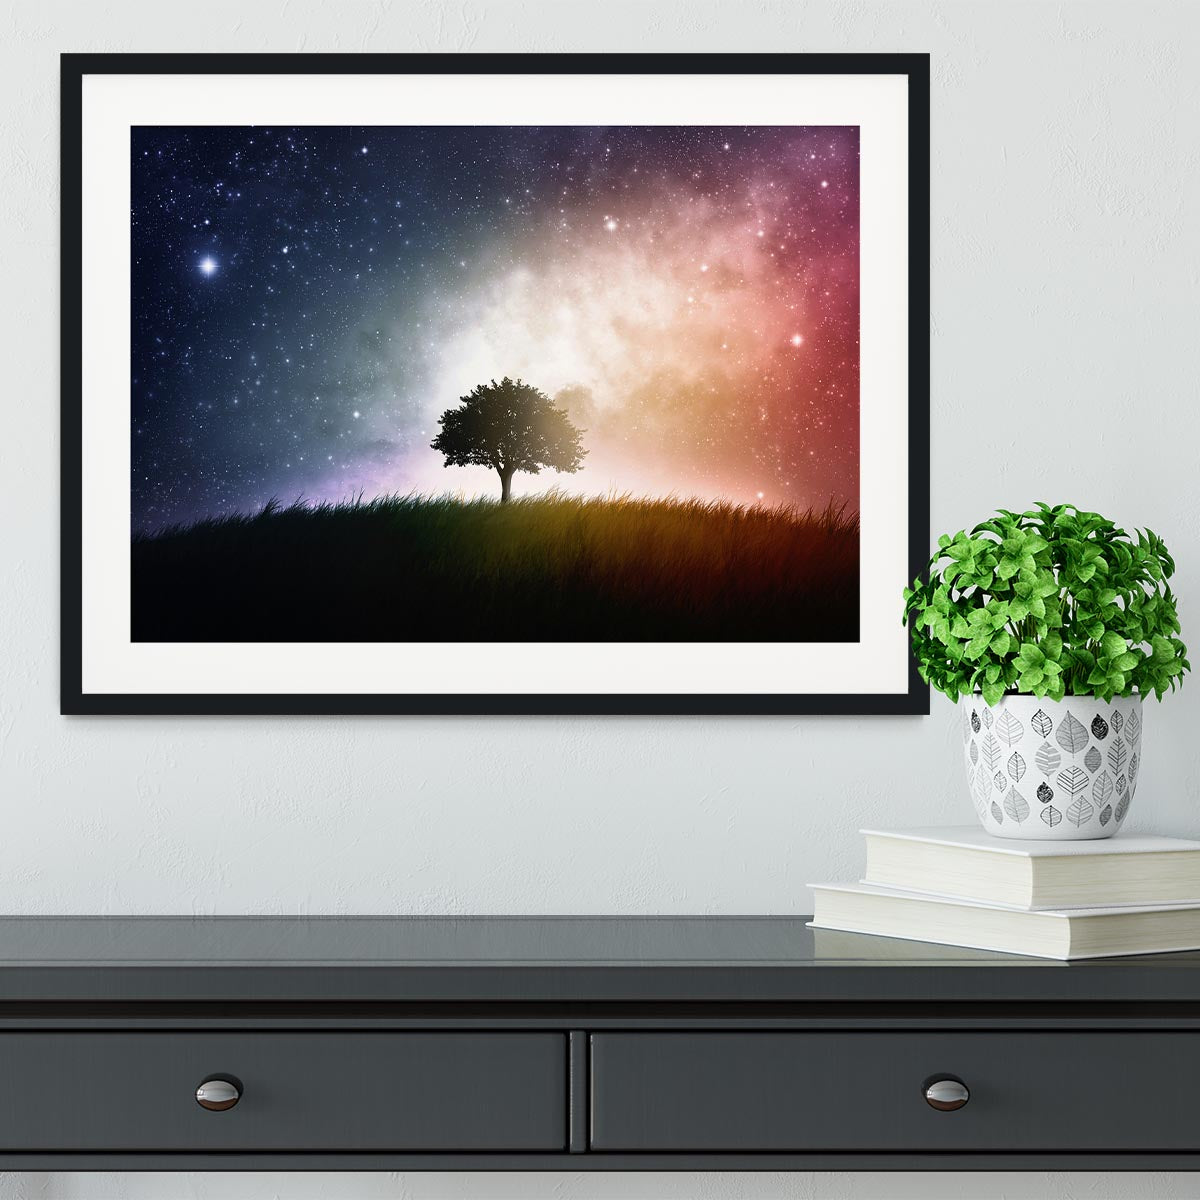 tree in a field with beautiful space background Framed Print - Canvas Art Rocks - 1